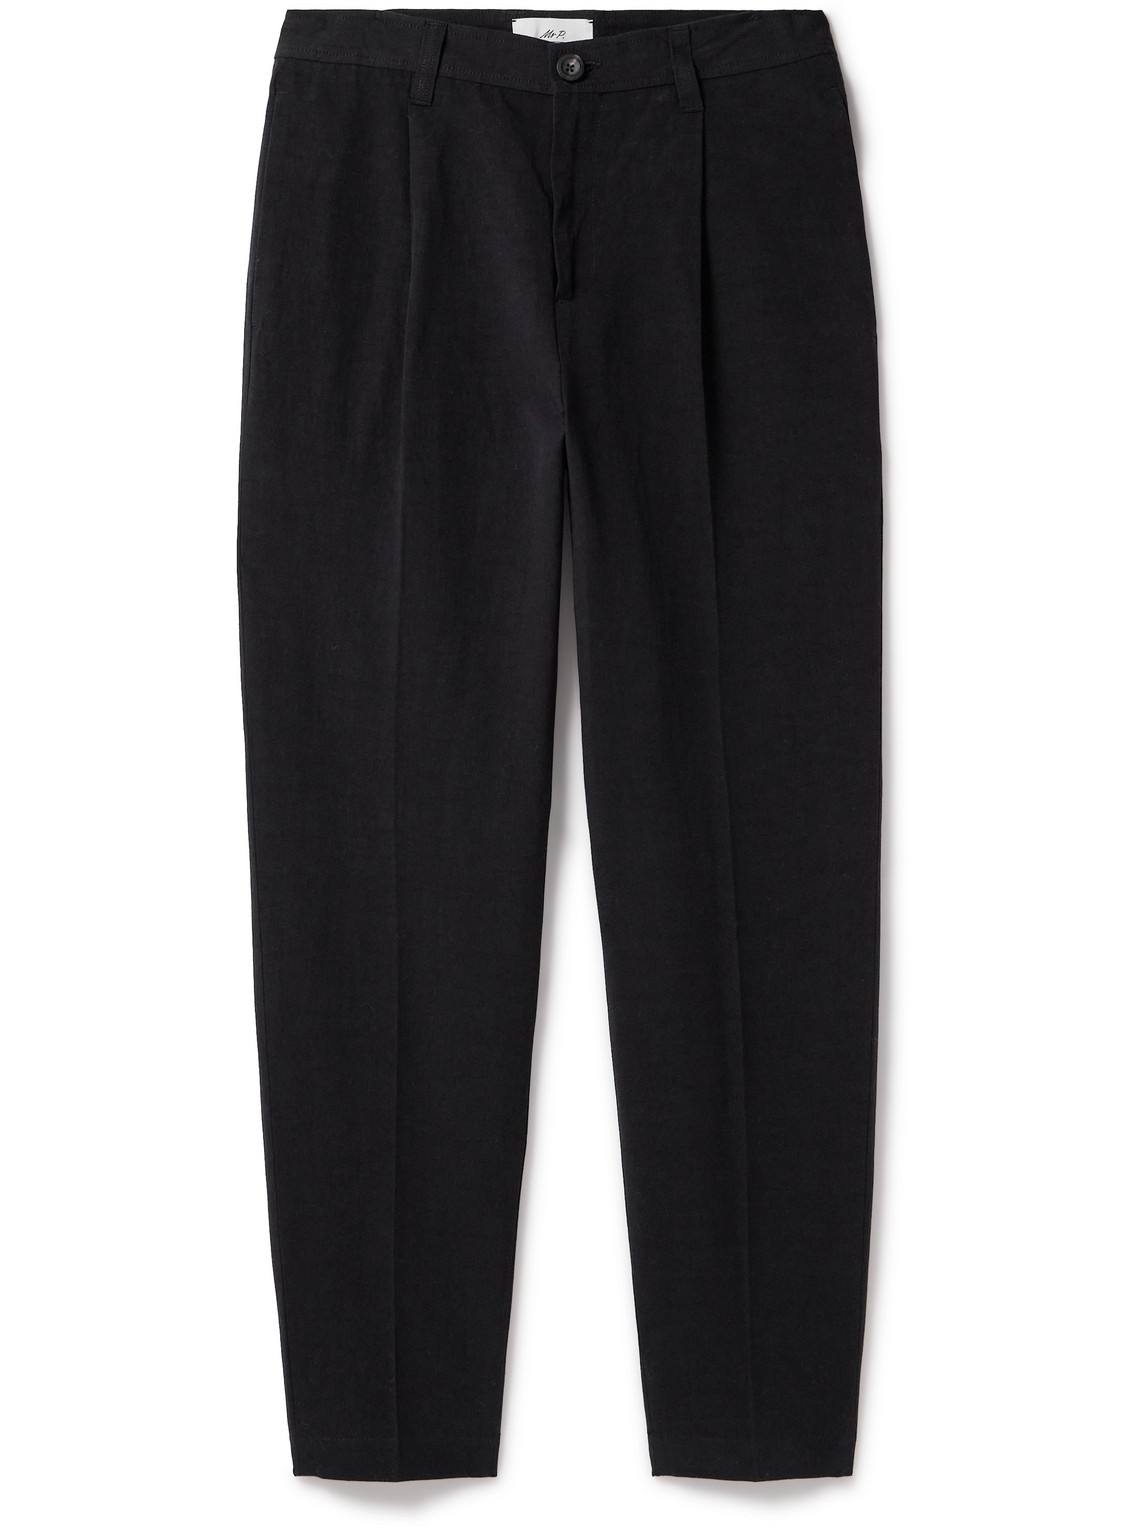 Mr P Tapered Pleated Linen, Cotton And Nylon-blend Trousers In Black